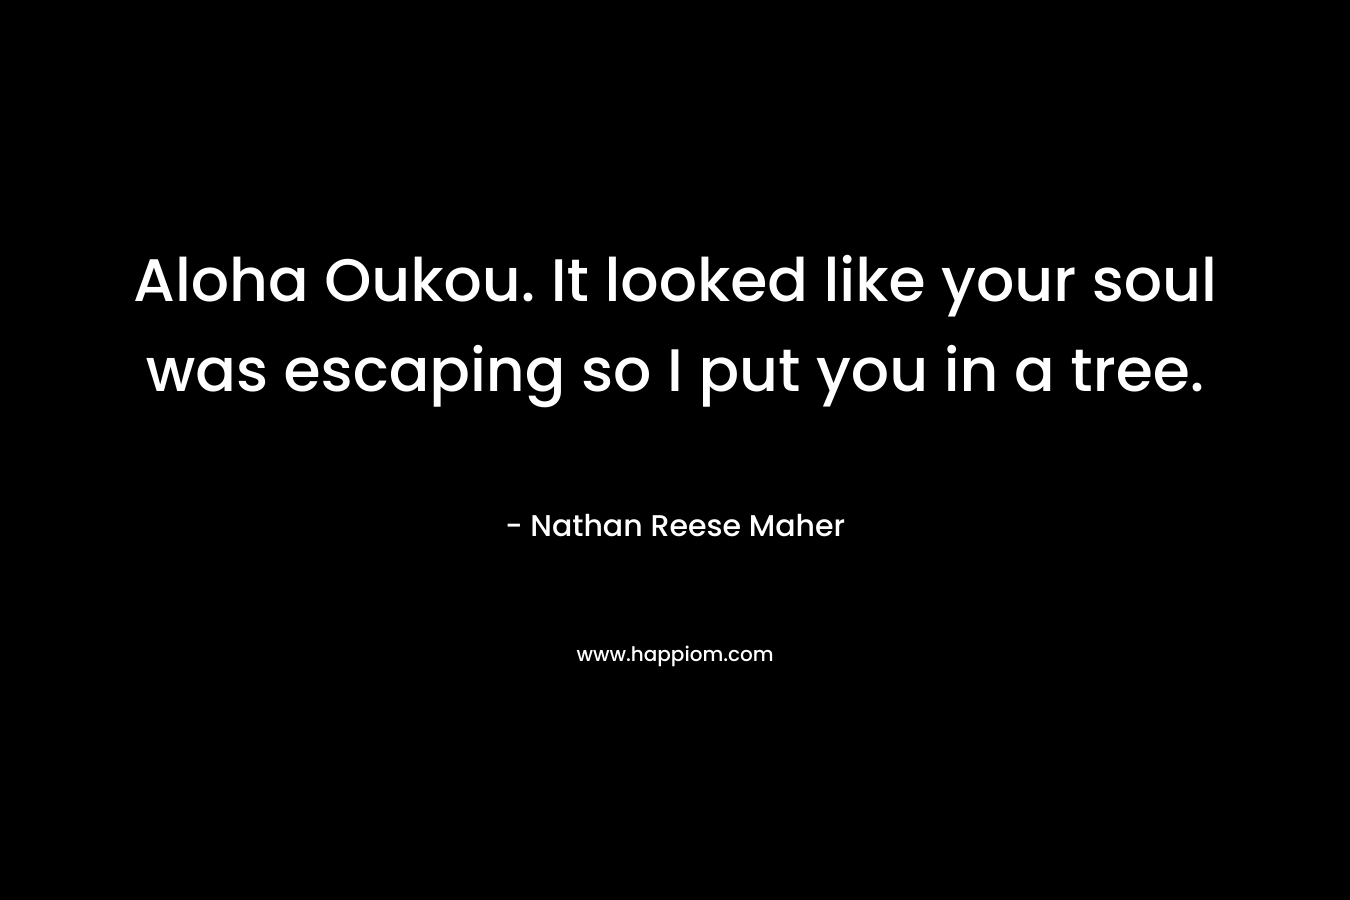 Aloha Oukou. It looked like your soul was escaping so I put you in a tree. – Nathan Reese Maher